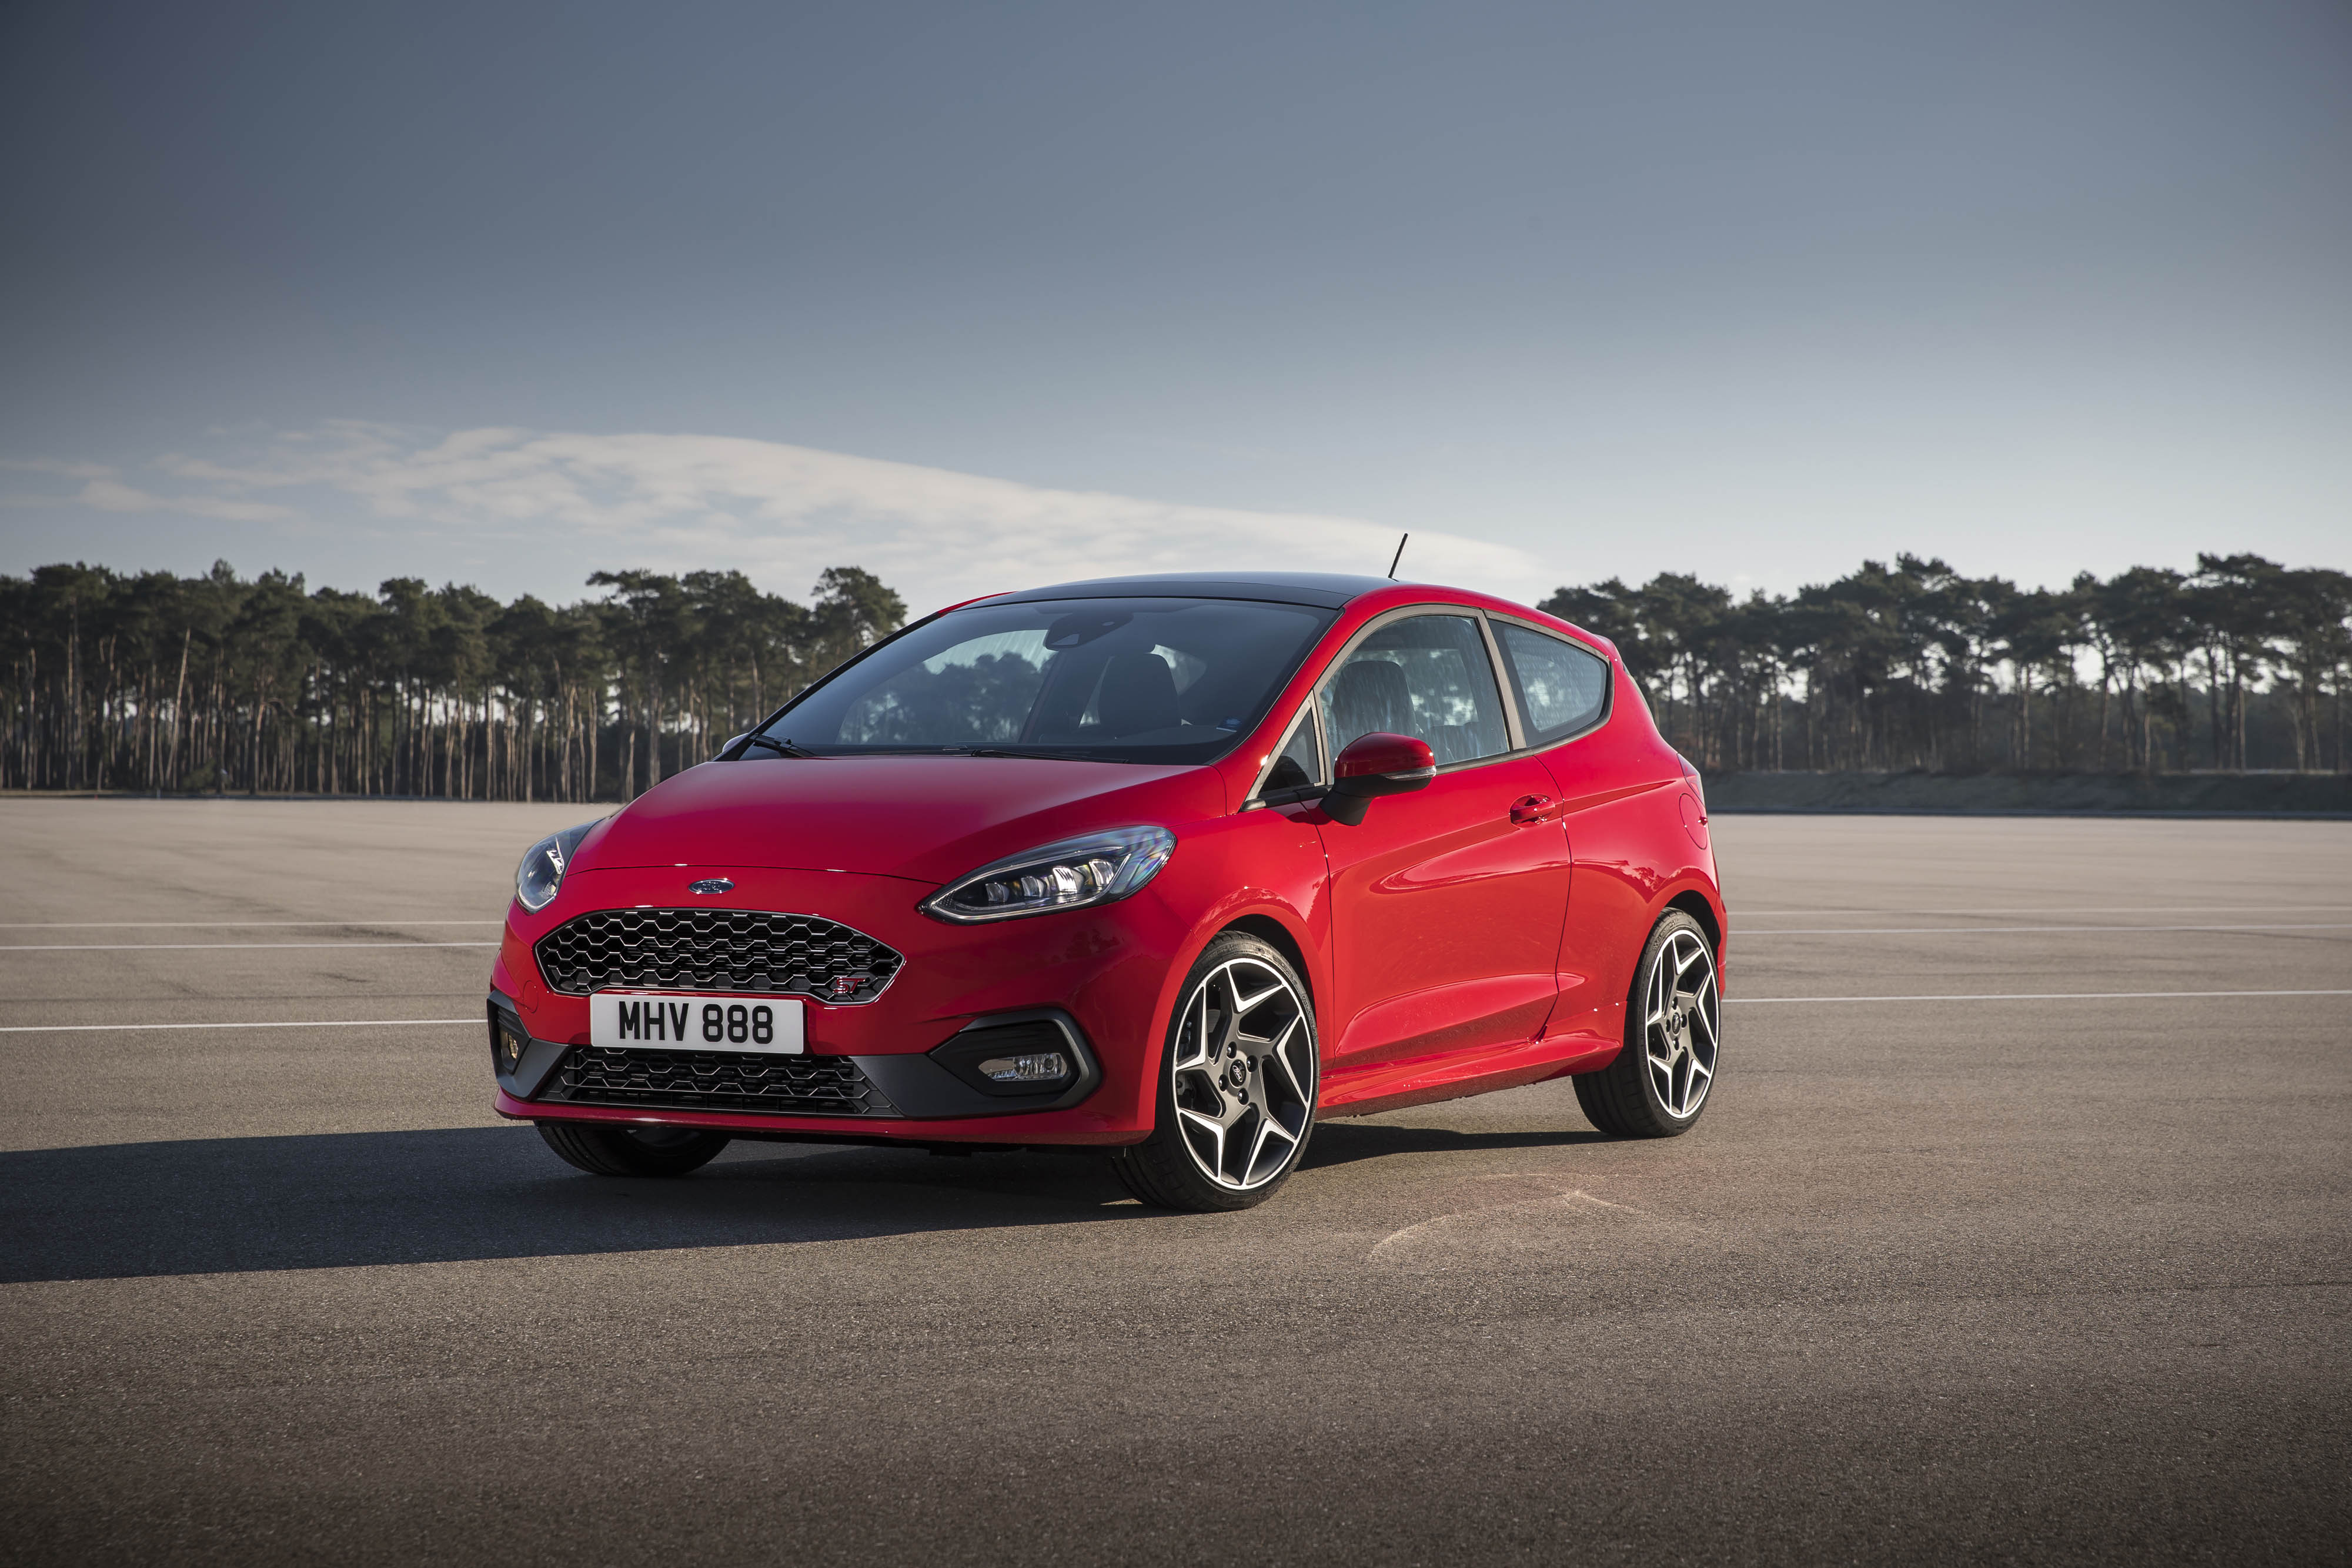 2018 Ford Fiesta ST Sounds Decent When Idling, Under Acceleration